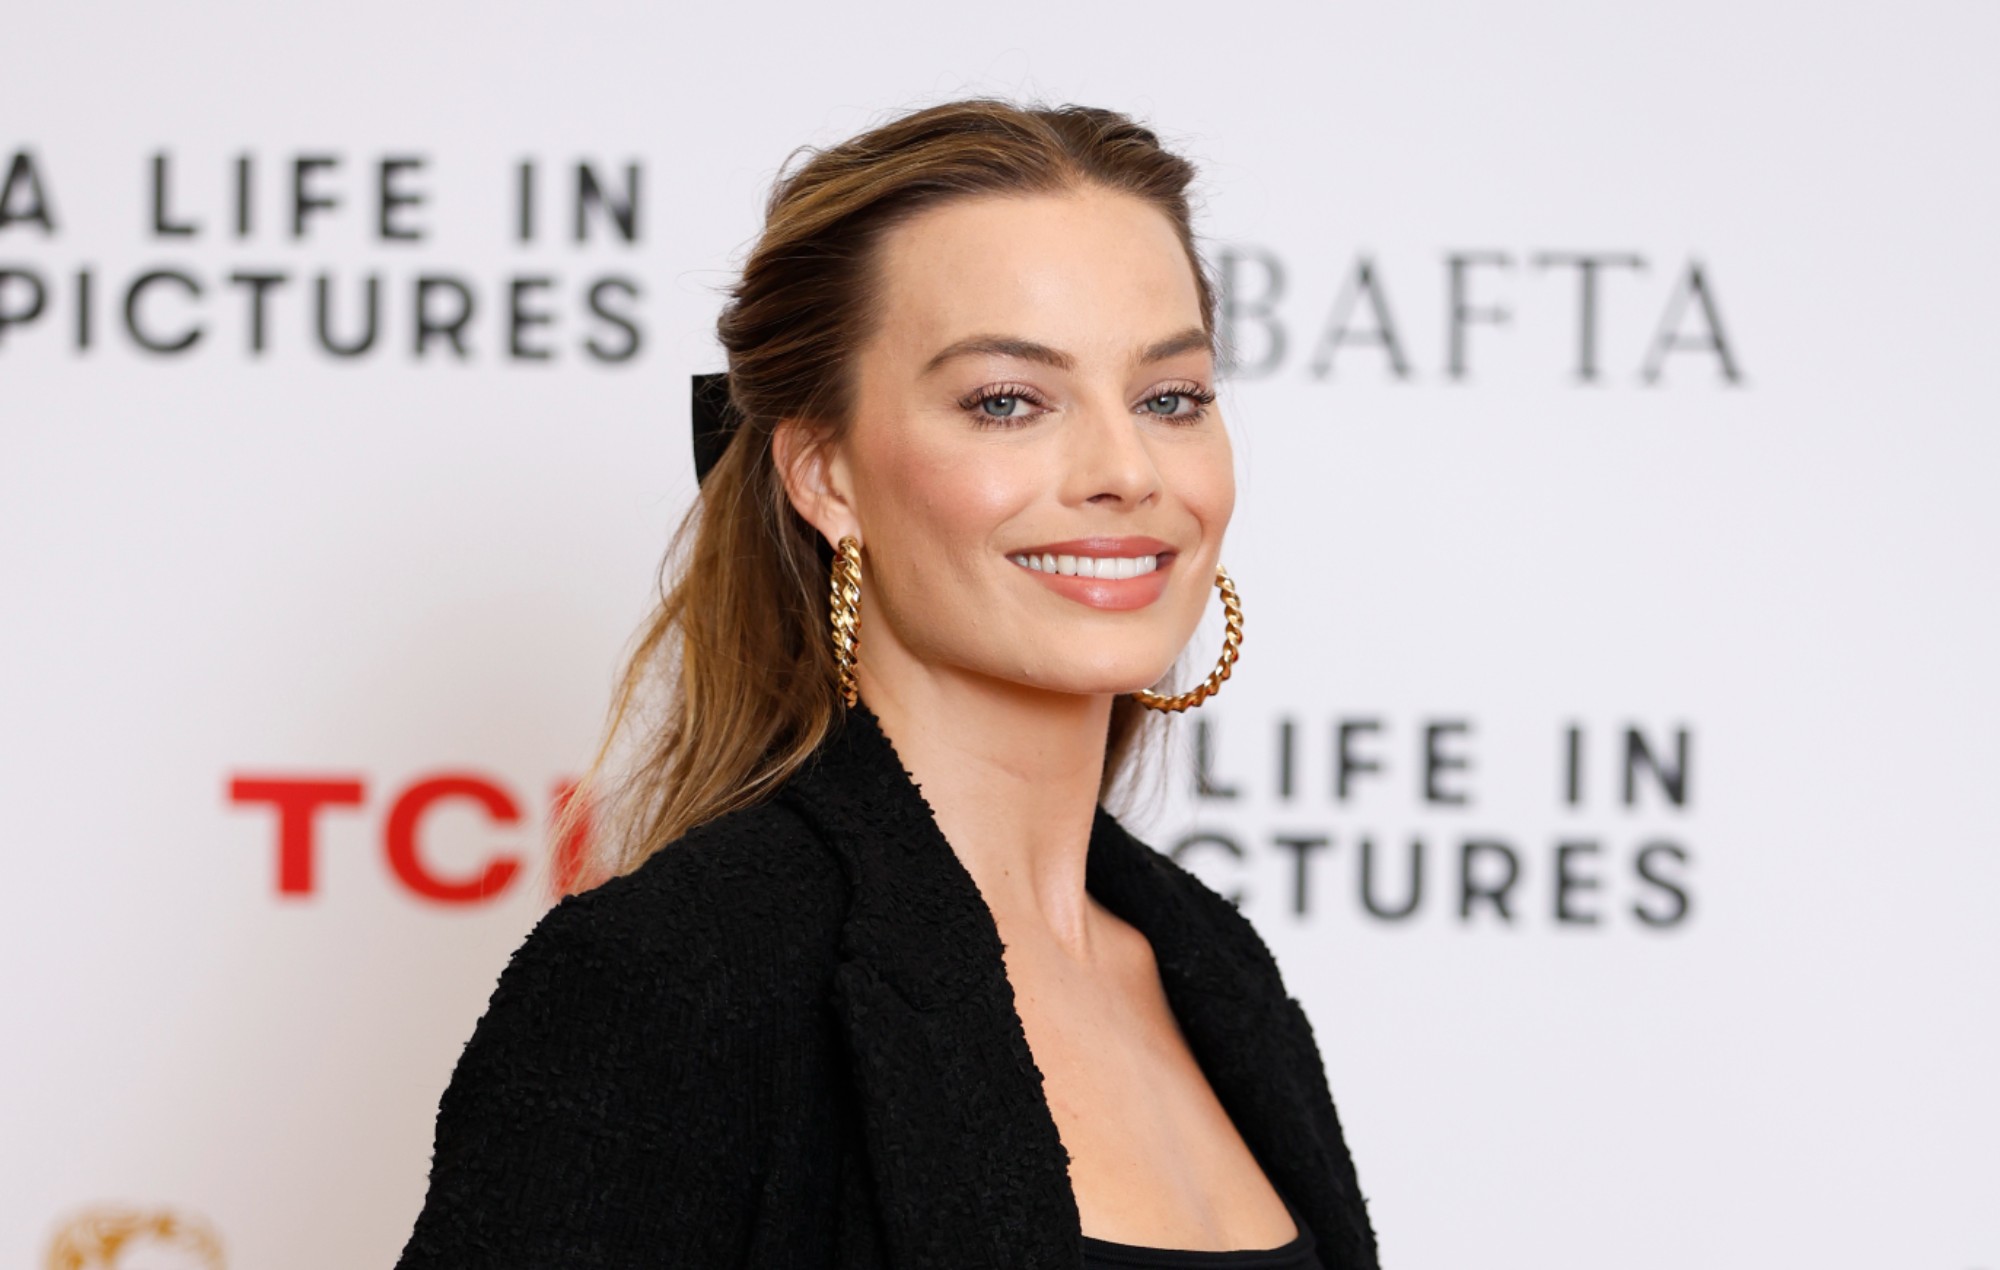 alexis j recommends margot robbie wolf of wall street naked pic